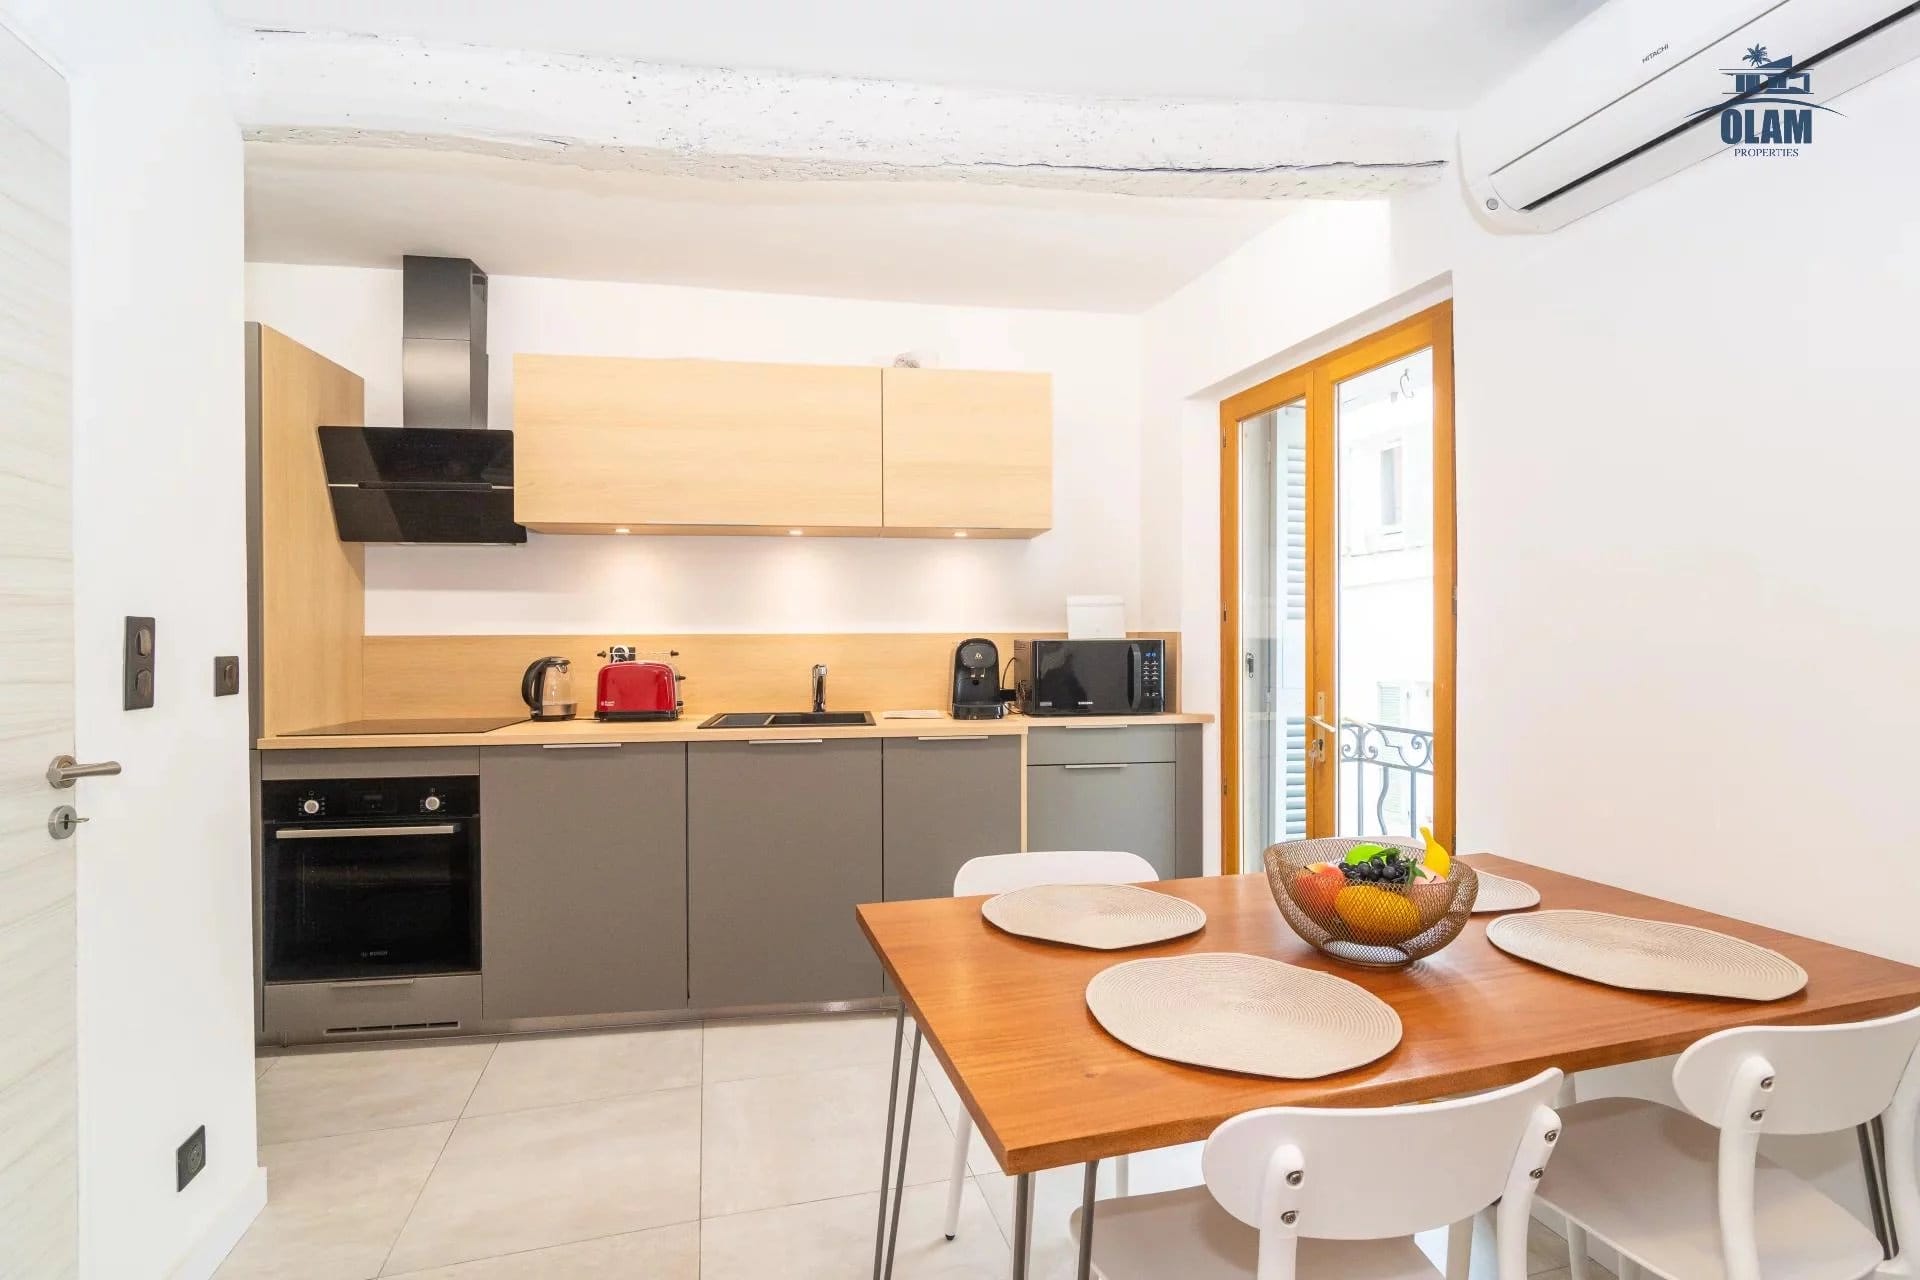 Village house Cannes Suquet : 3 bedrooms, 3 bathrooms, renovated, with independent studio